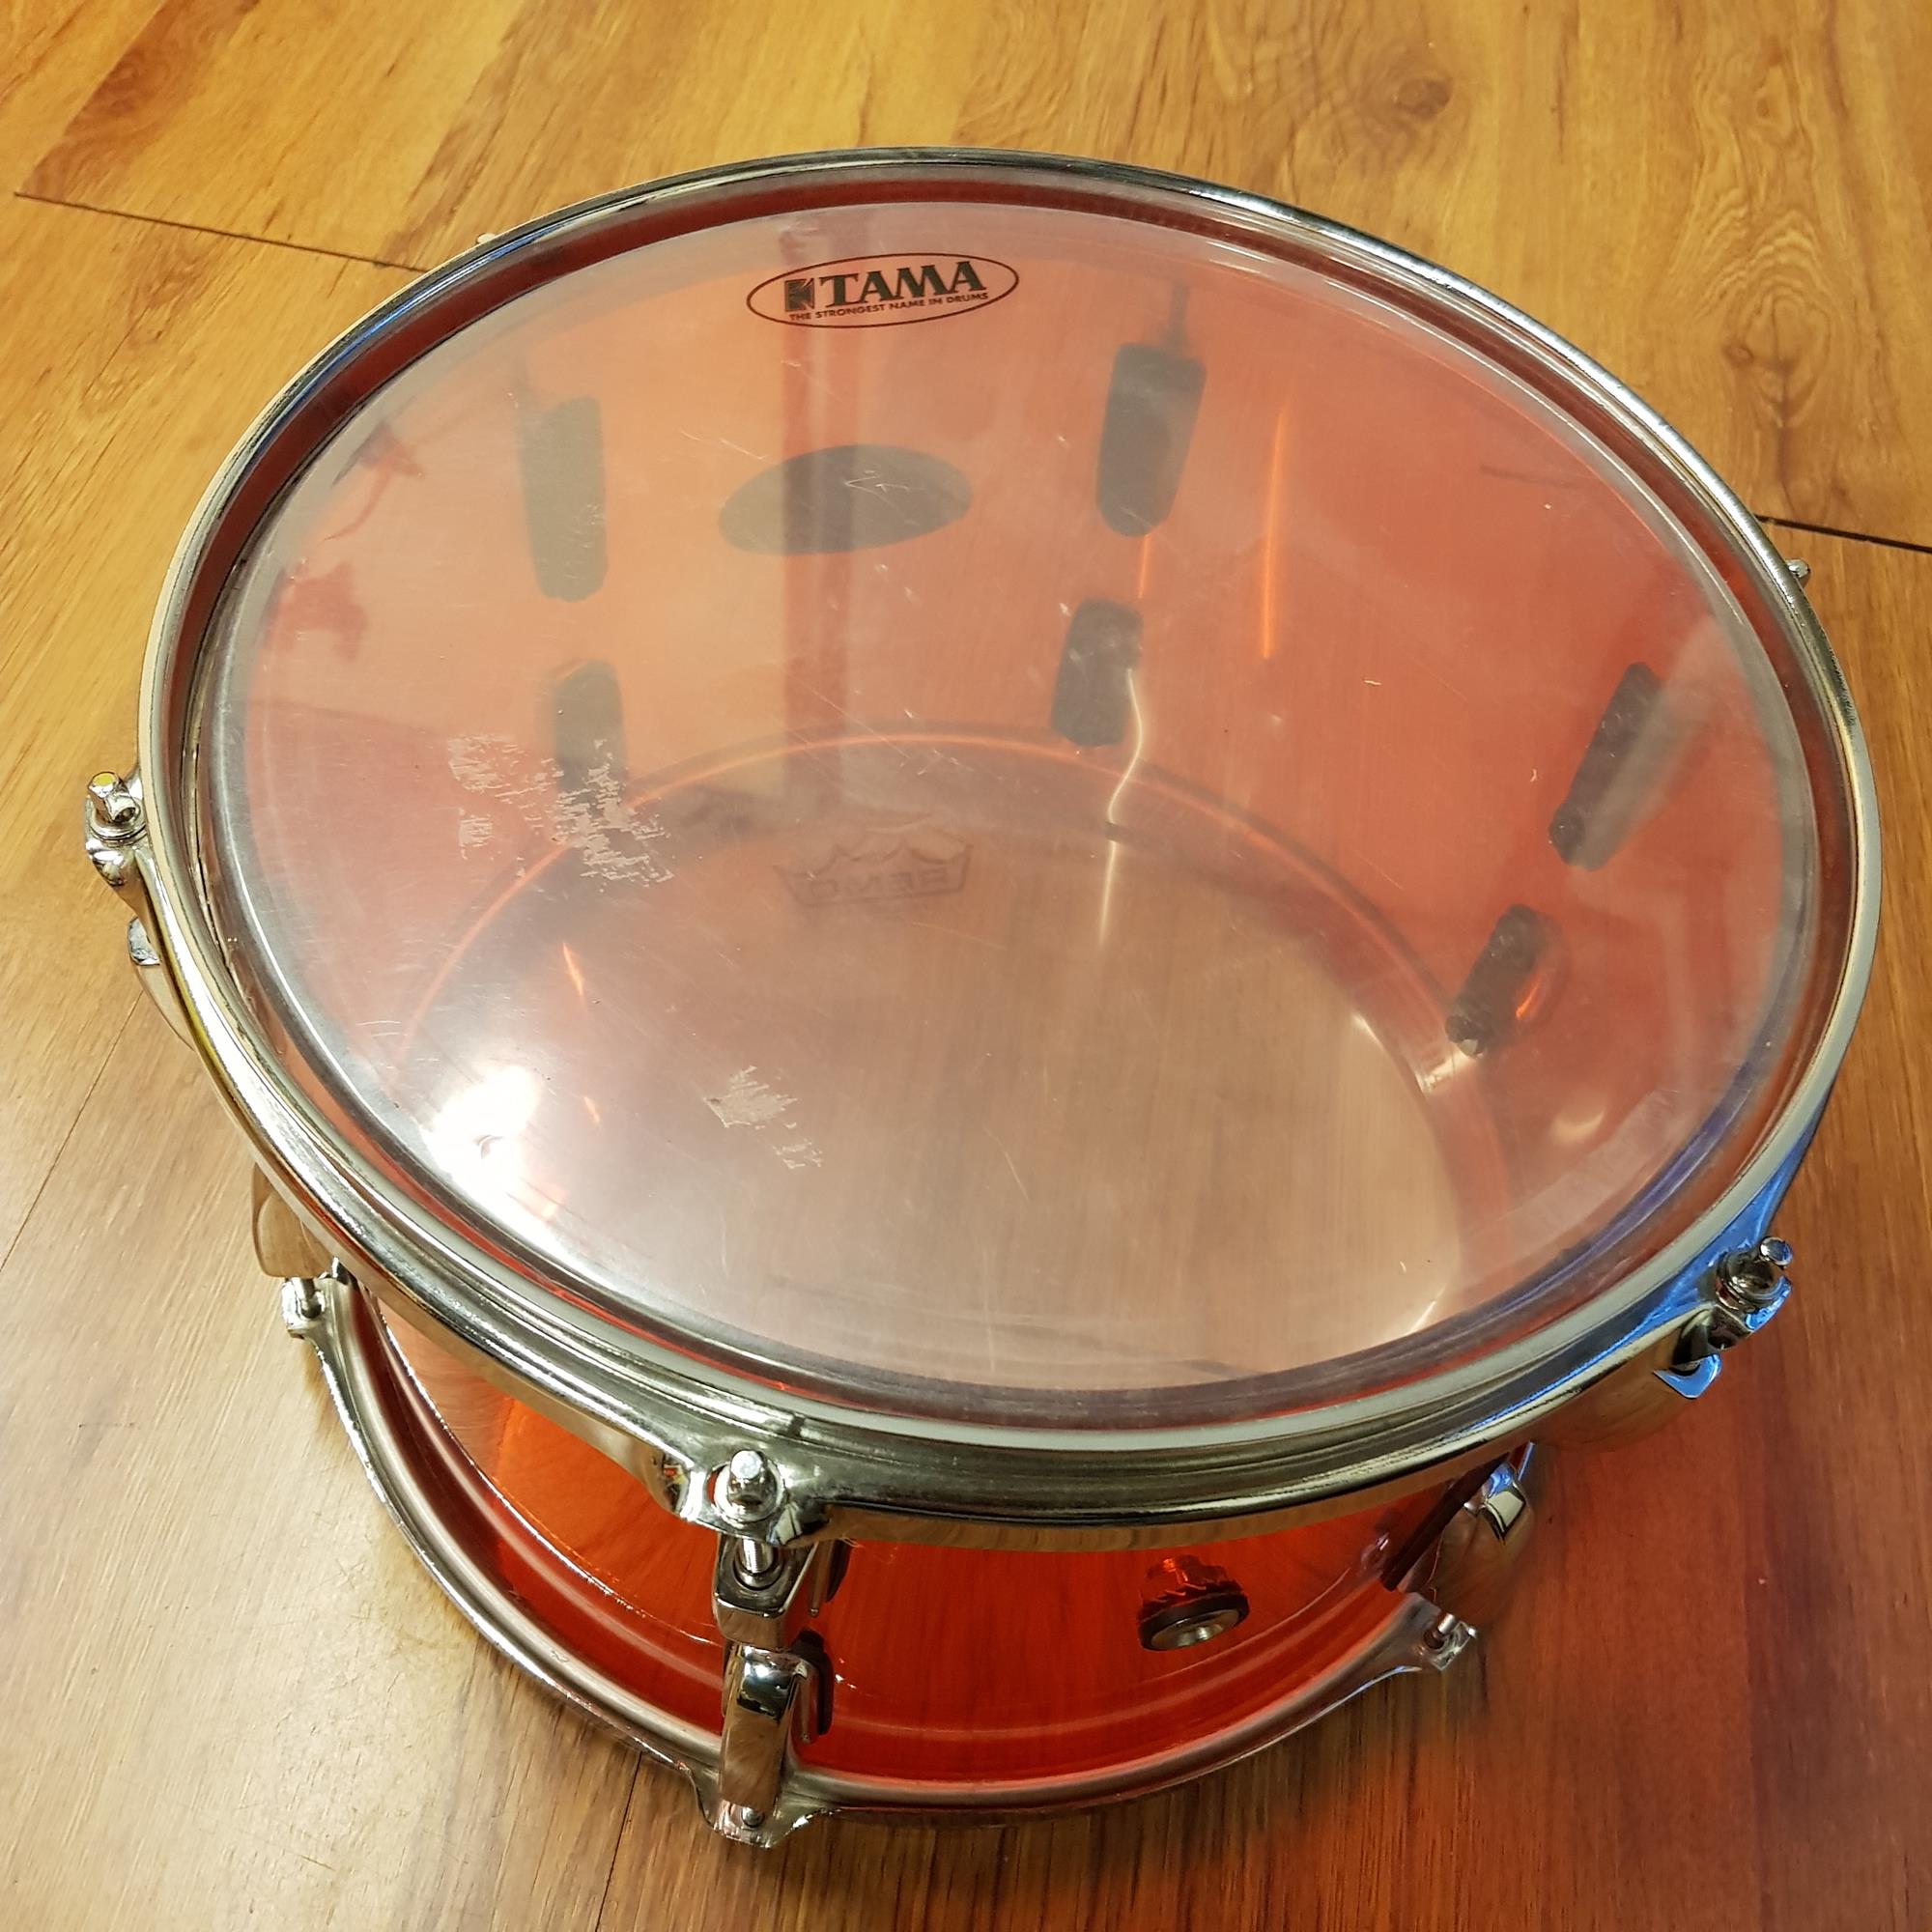 PEARL CRYSTAL BEAT RUBY RED DRUMSET CRB524P/C731 ACRYLIC